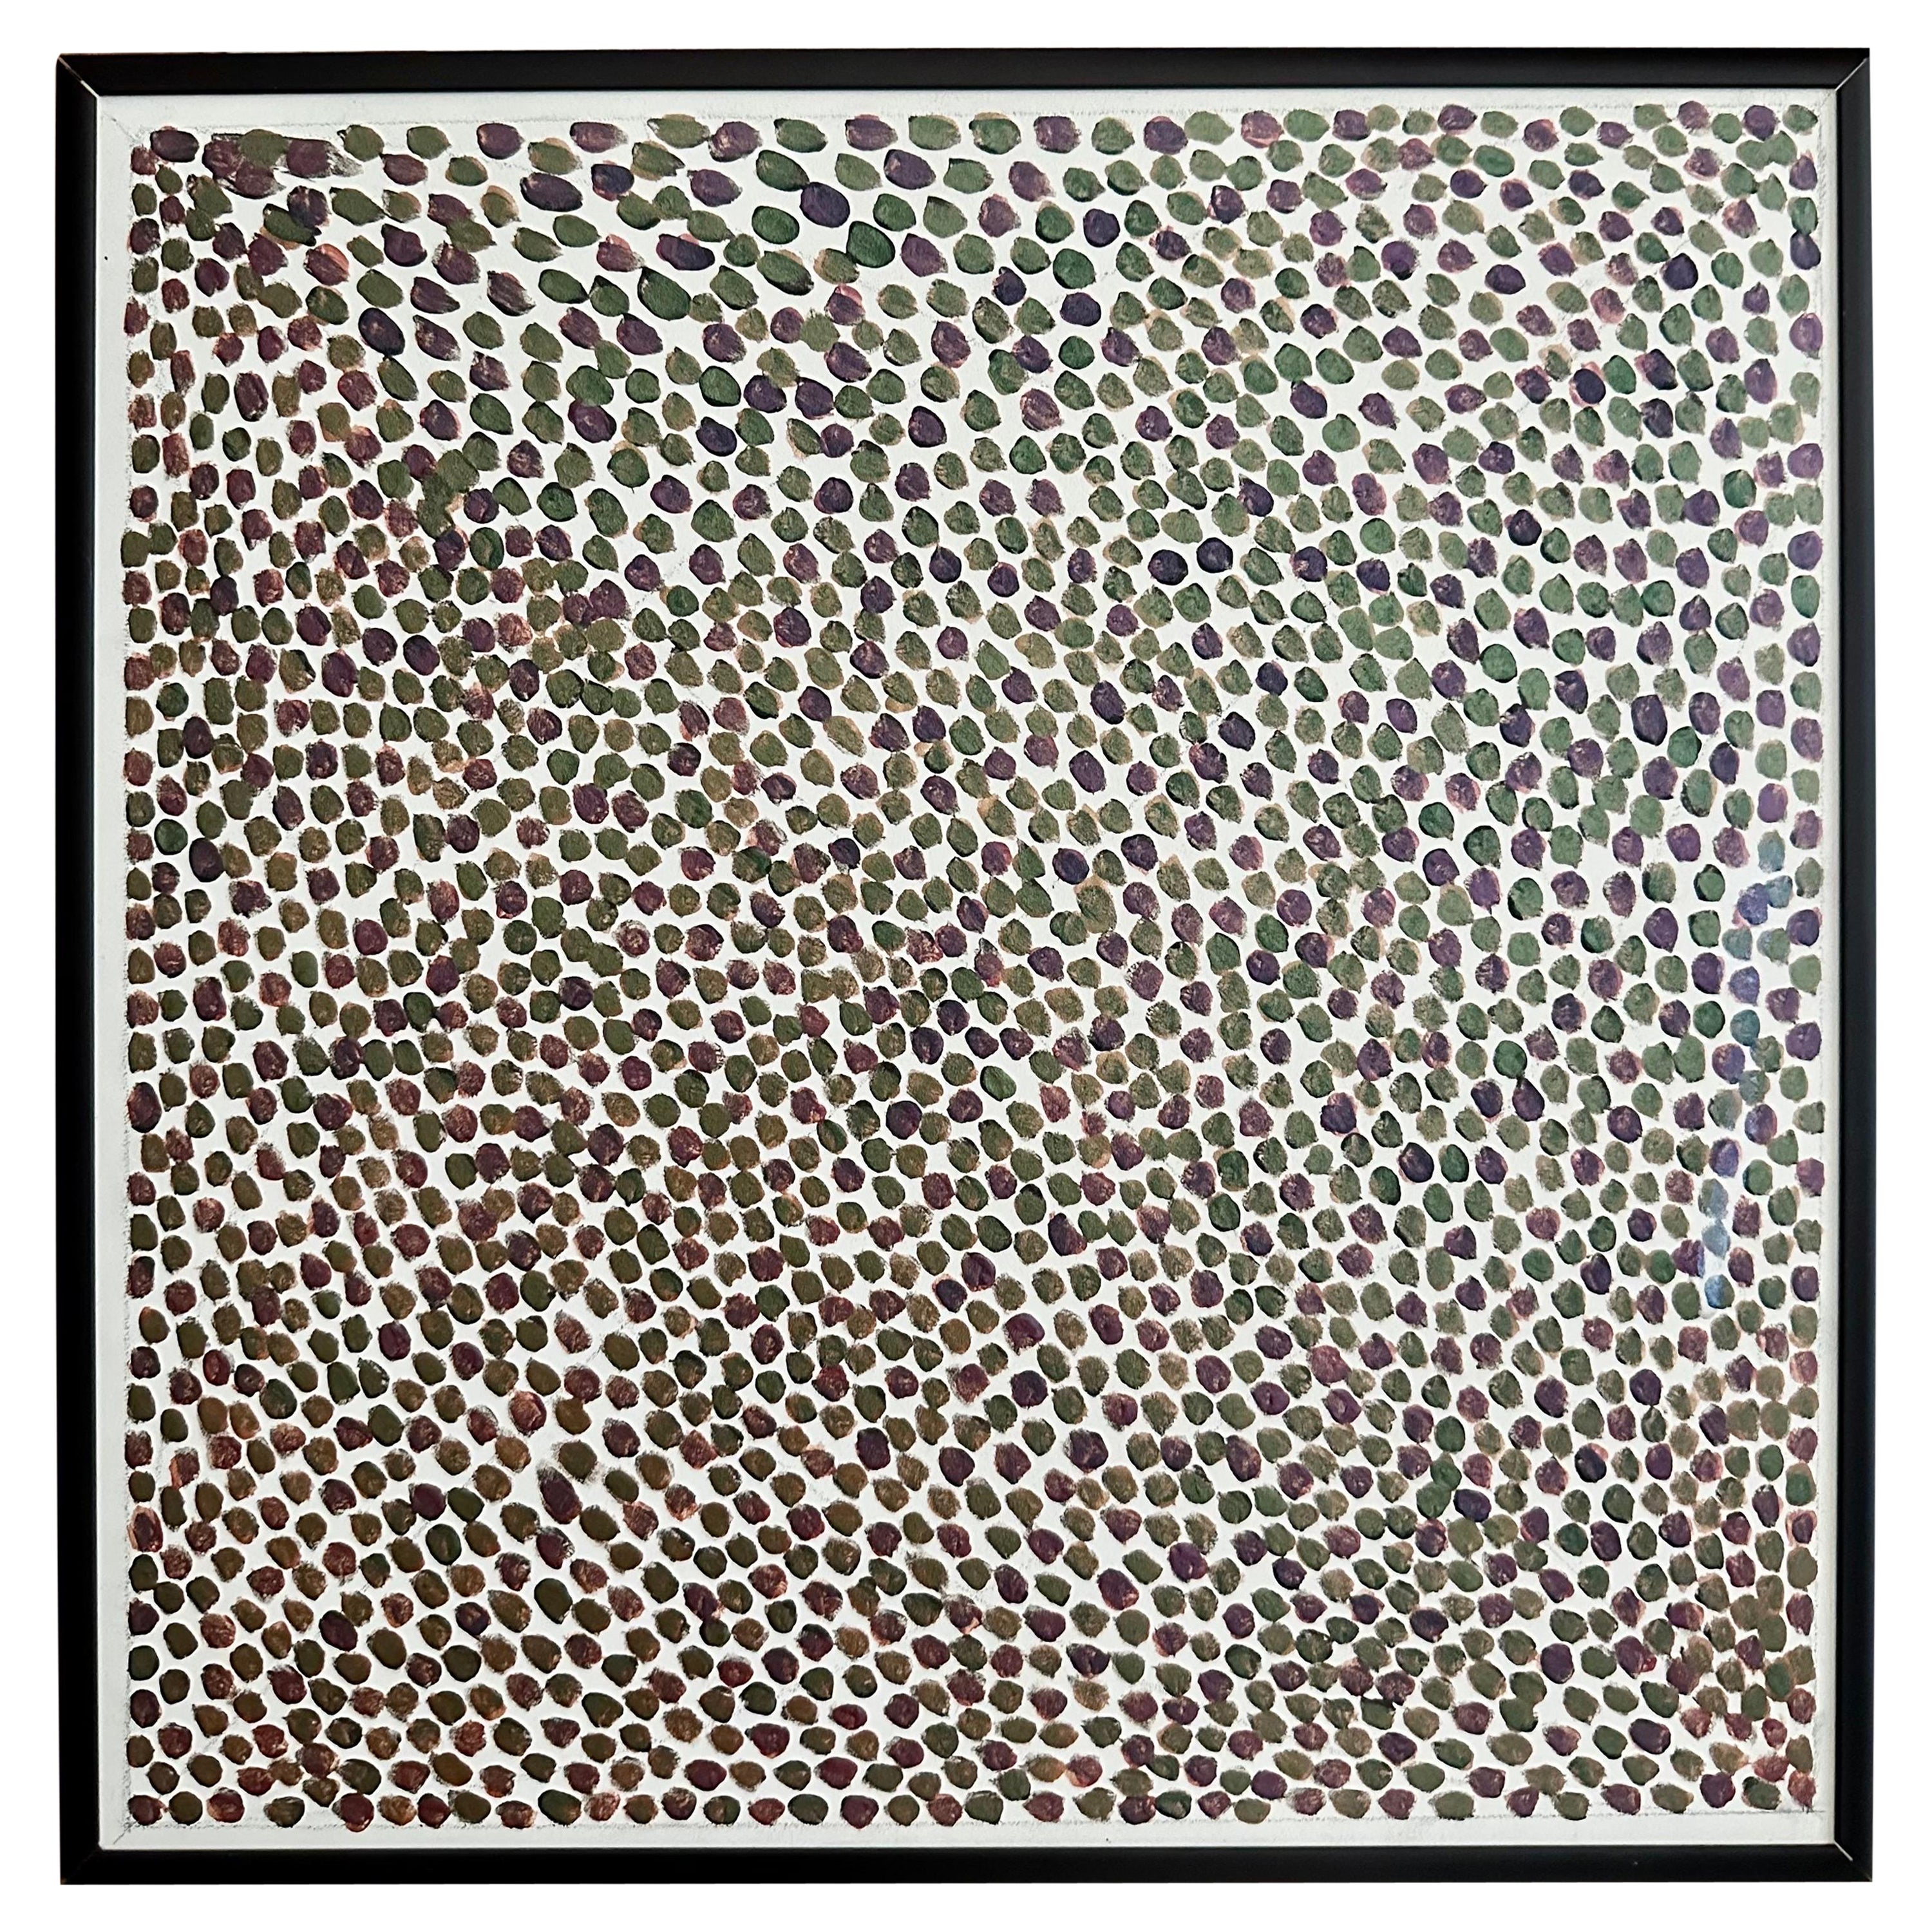 David Roth Original Acrylic Painting on Masonite "Motif in Dots" For Sale